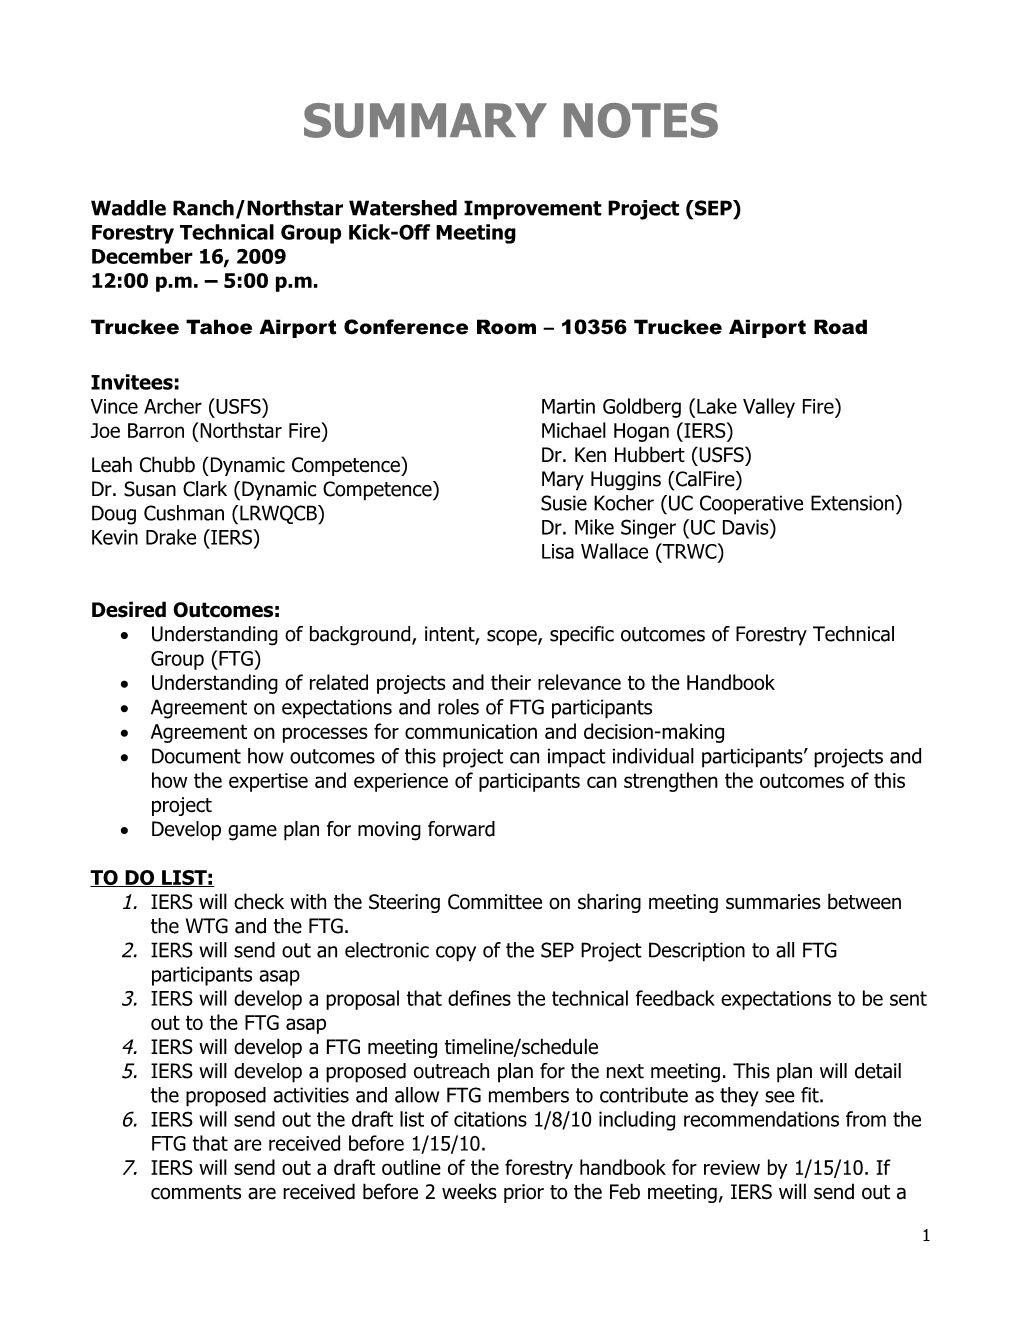 Waddle Ranch/Northstar Watershed Improvement Project (SEP)